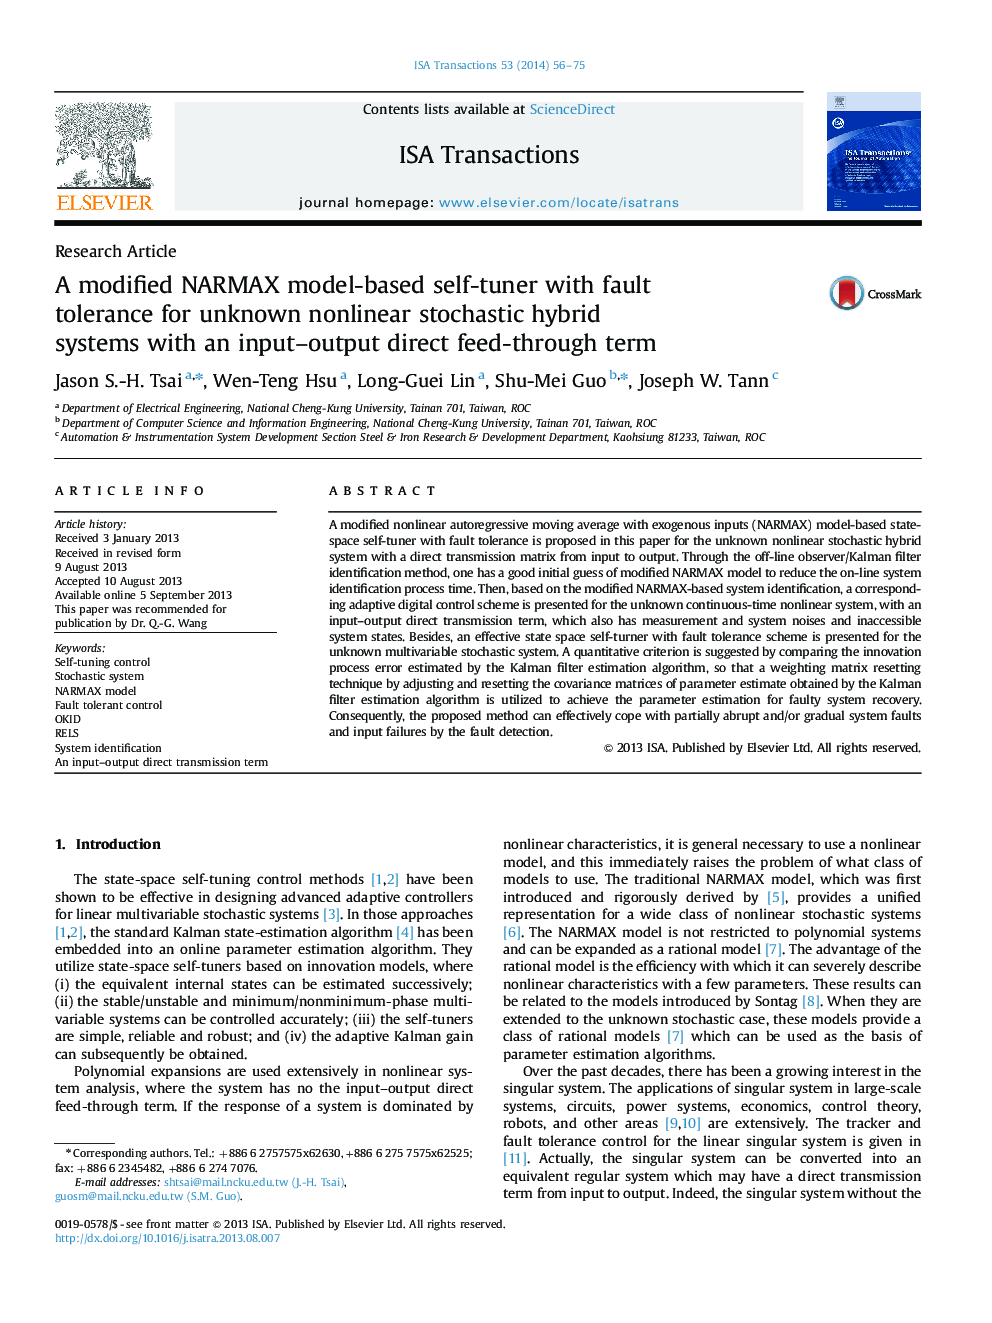 Research ArticleA modified NARMAX model-based self-tuner with fault tolerance for unknown nonlinear stochastic hybrid systems with an input-output direct feed-through term